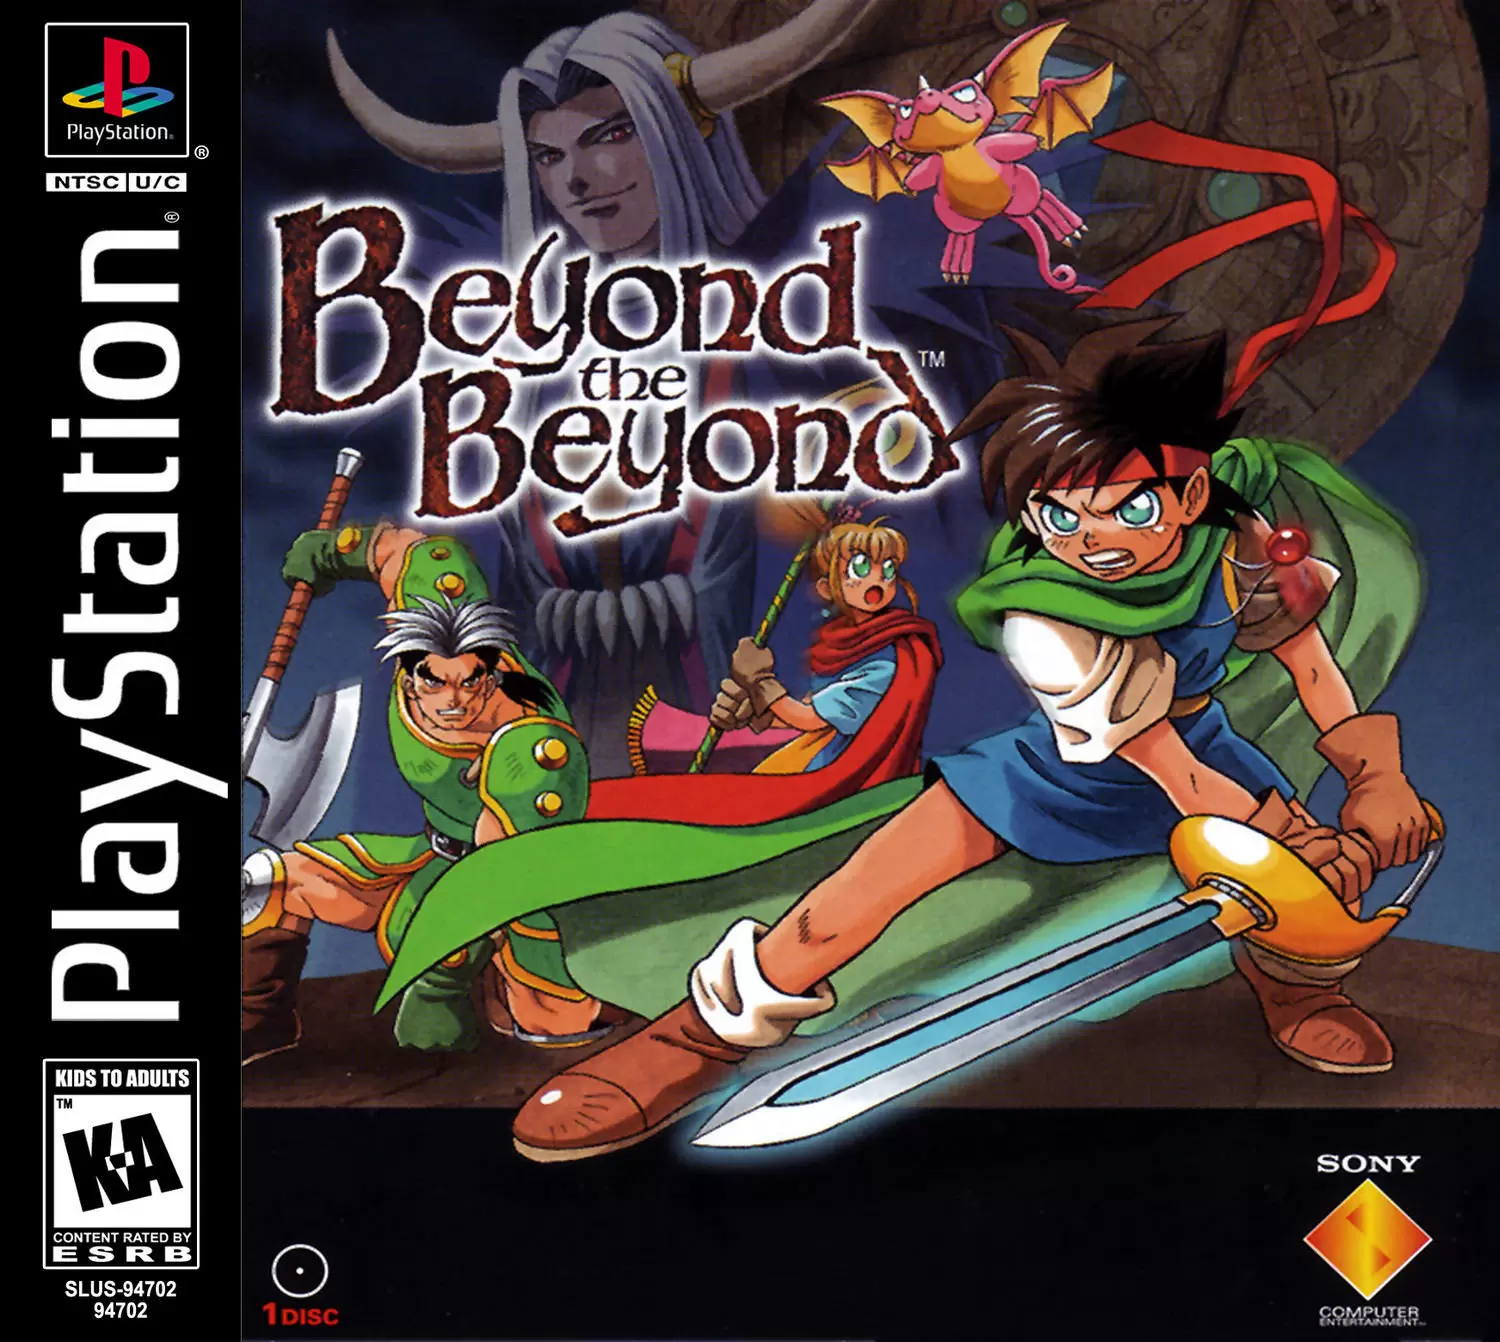 Playstation games - Beyond the Beyond